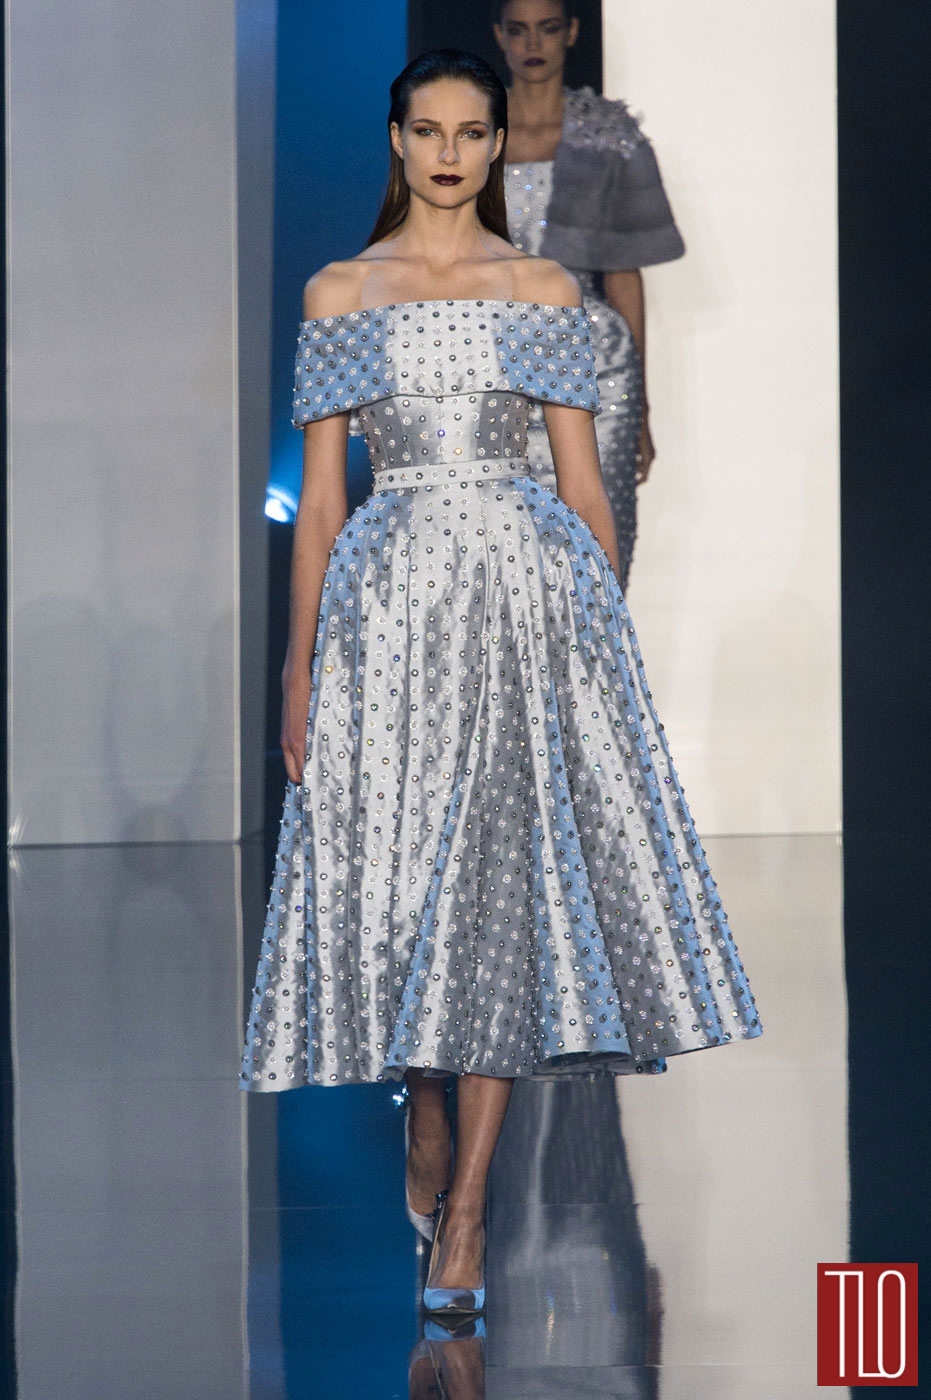 Ralph-Russo-Fall-2014-Couture-Collection-Paris-Tom-Lorenzo-Site-TLO (1)